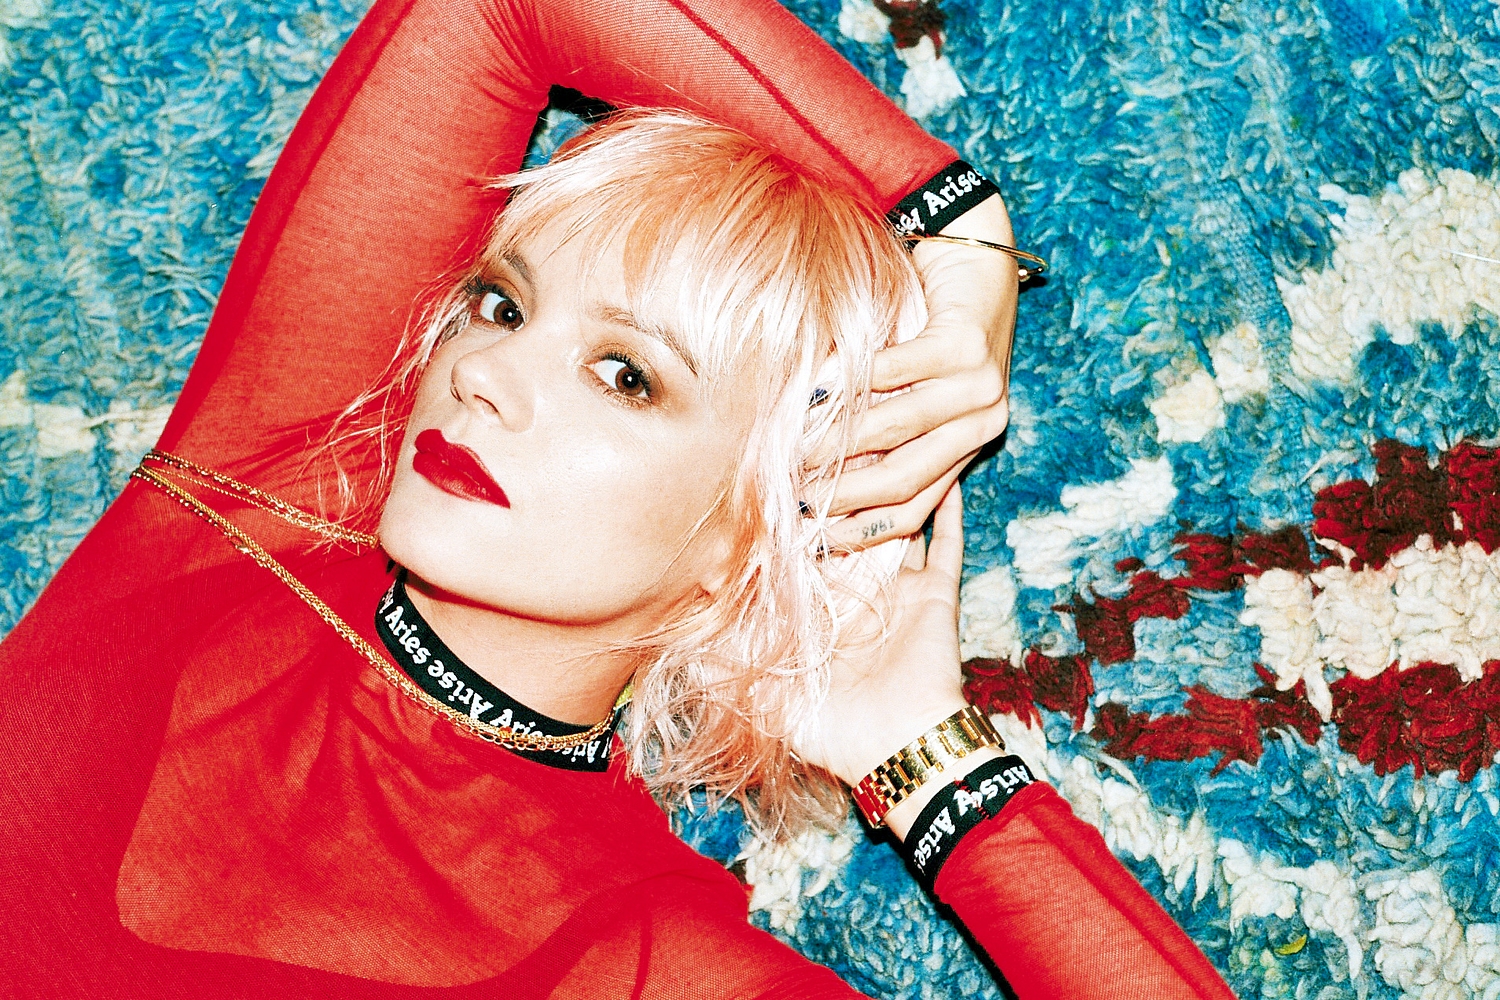 Lily Allen, MNEK and more are set for Mighty Hoopla 2018